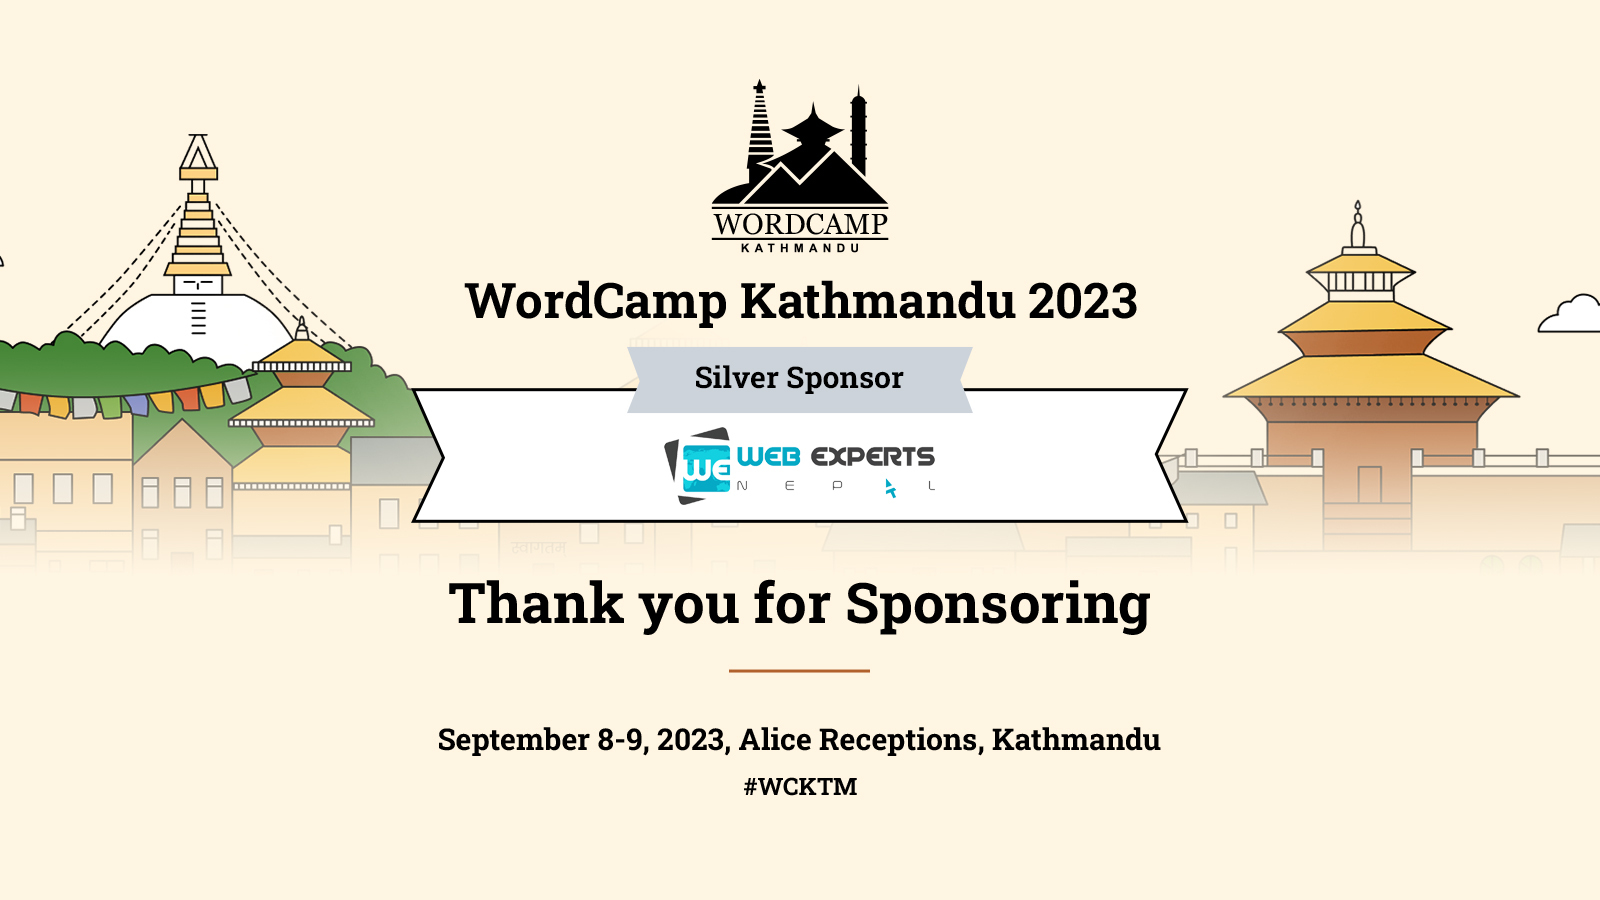 Thank you Web Experts Nepal for sponsoring